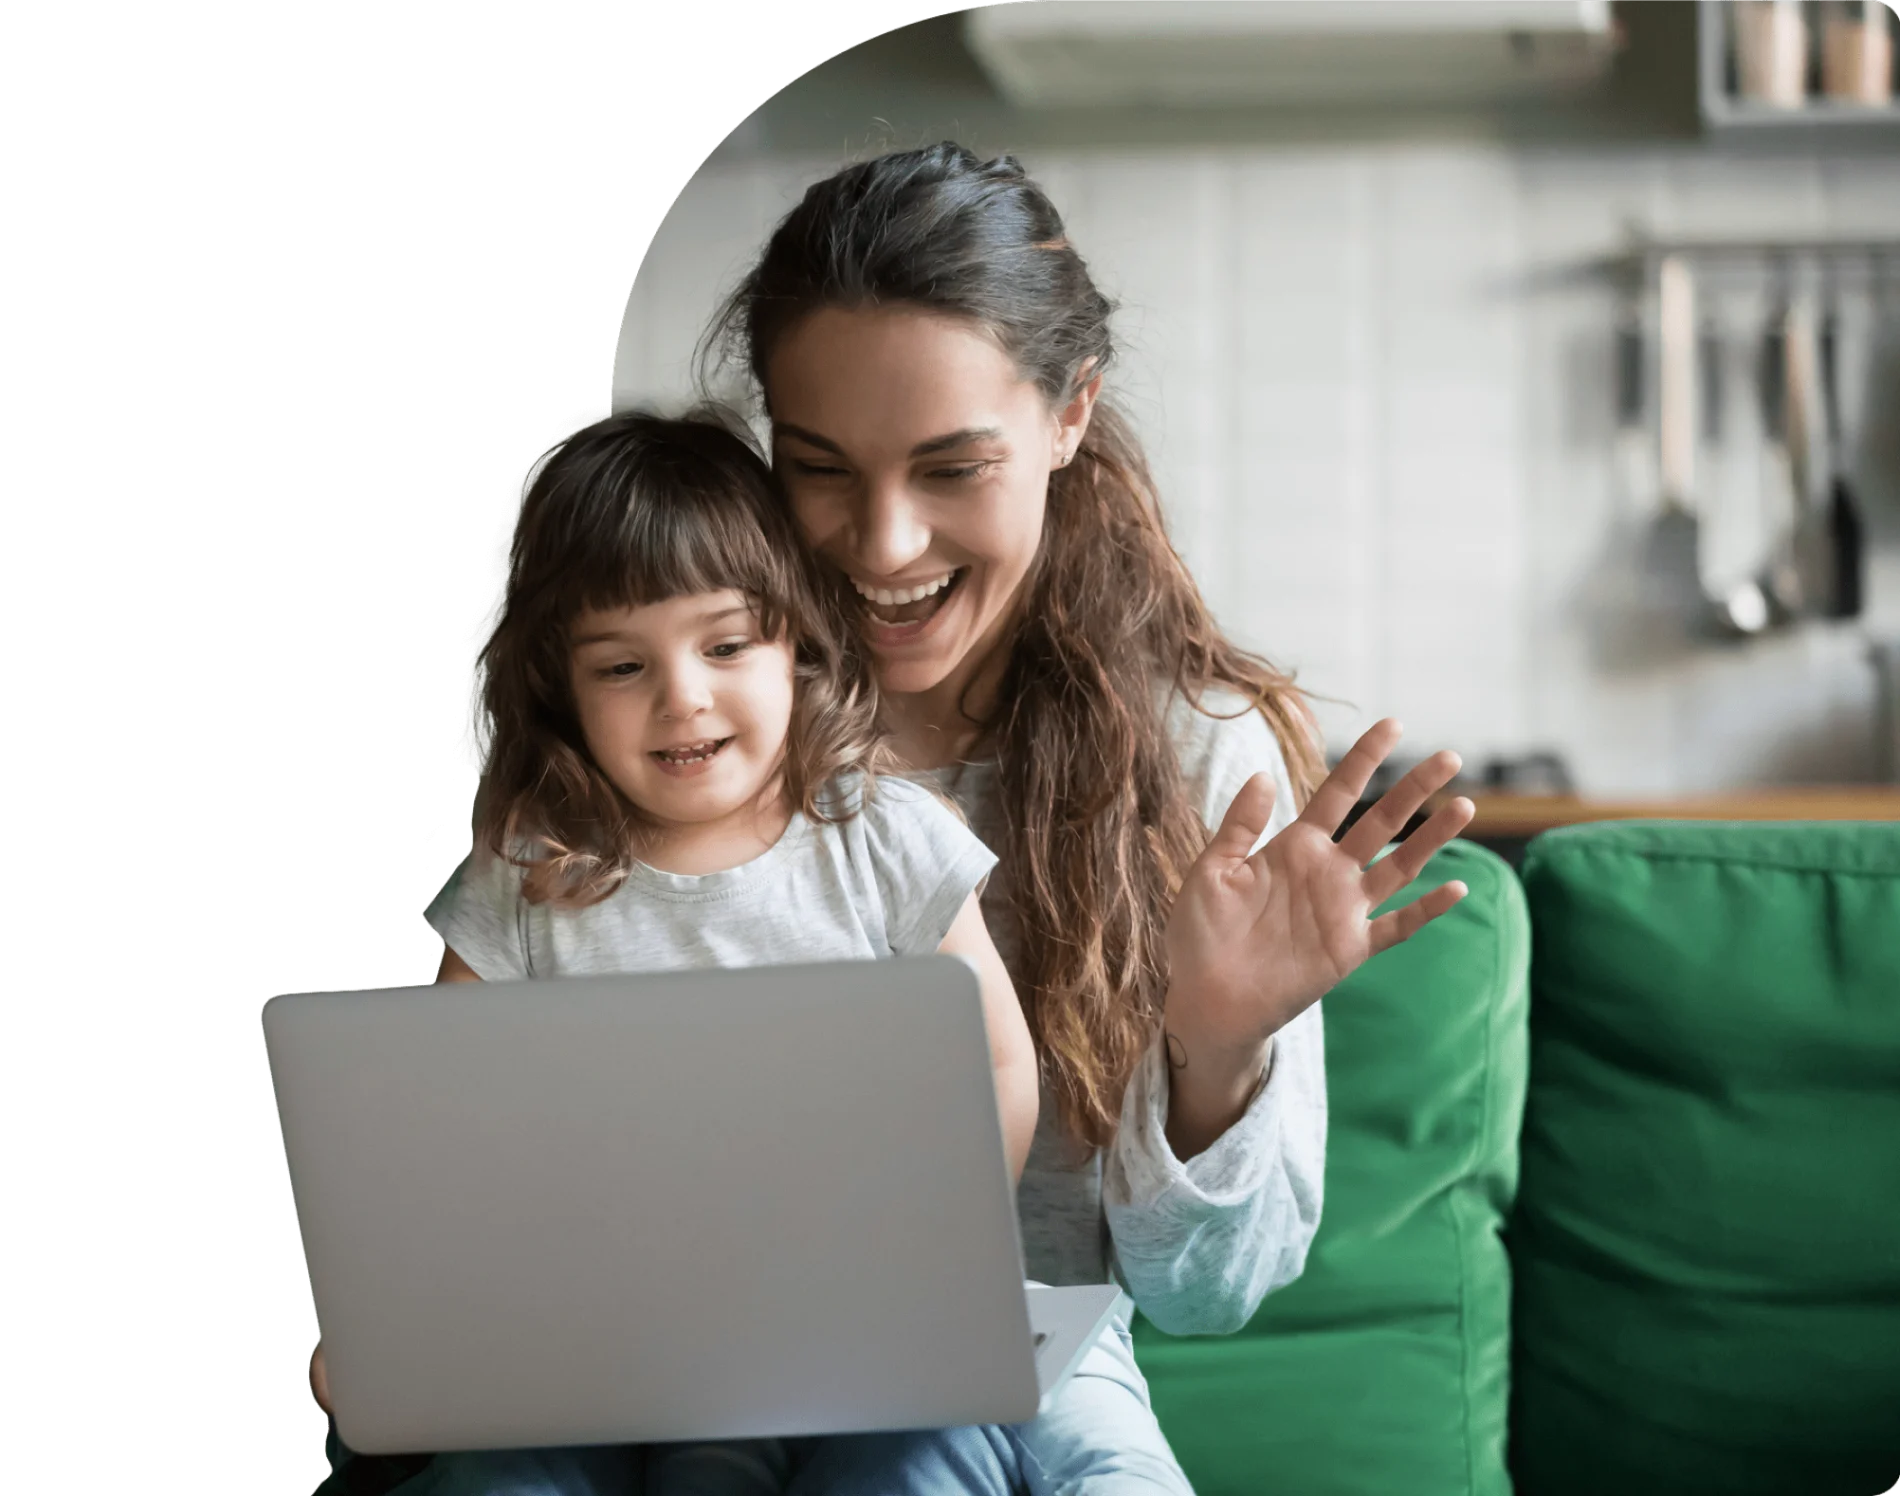 A mother and her daughter smile while viewing a laptop. The mother waves at the screen as they connect with family.